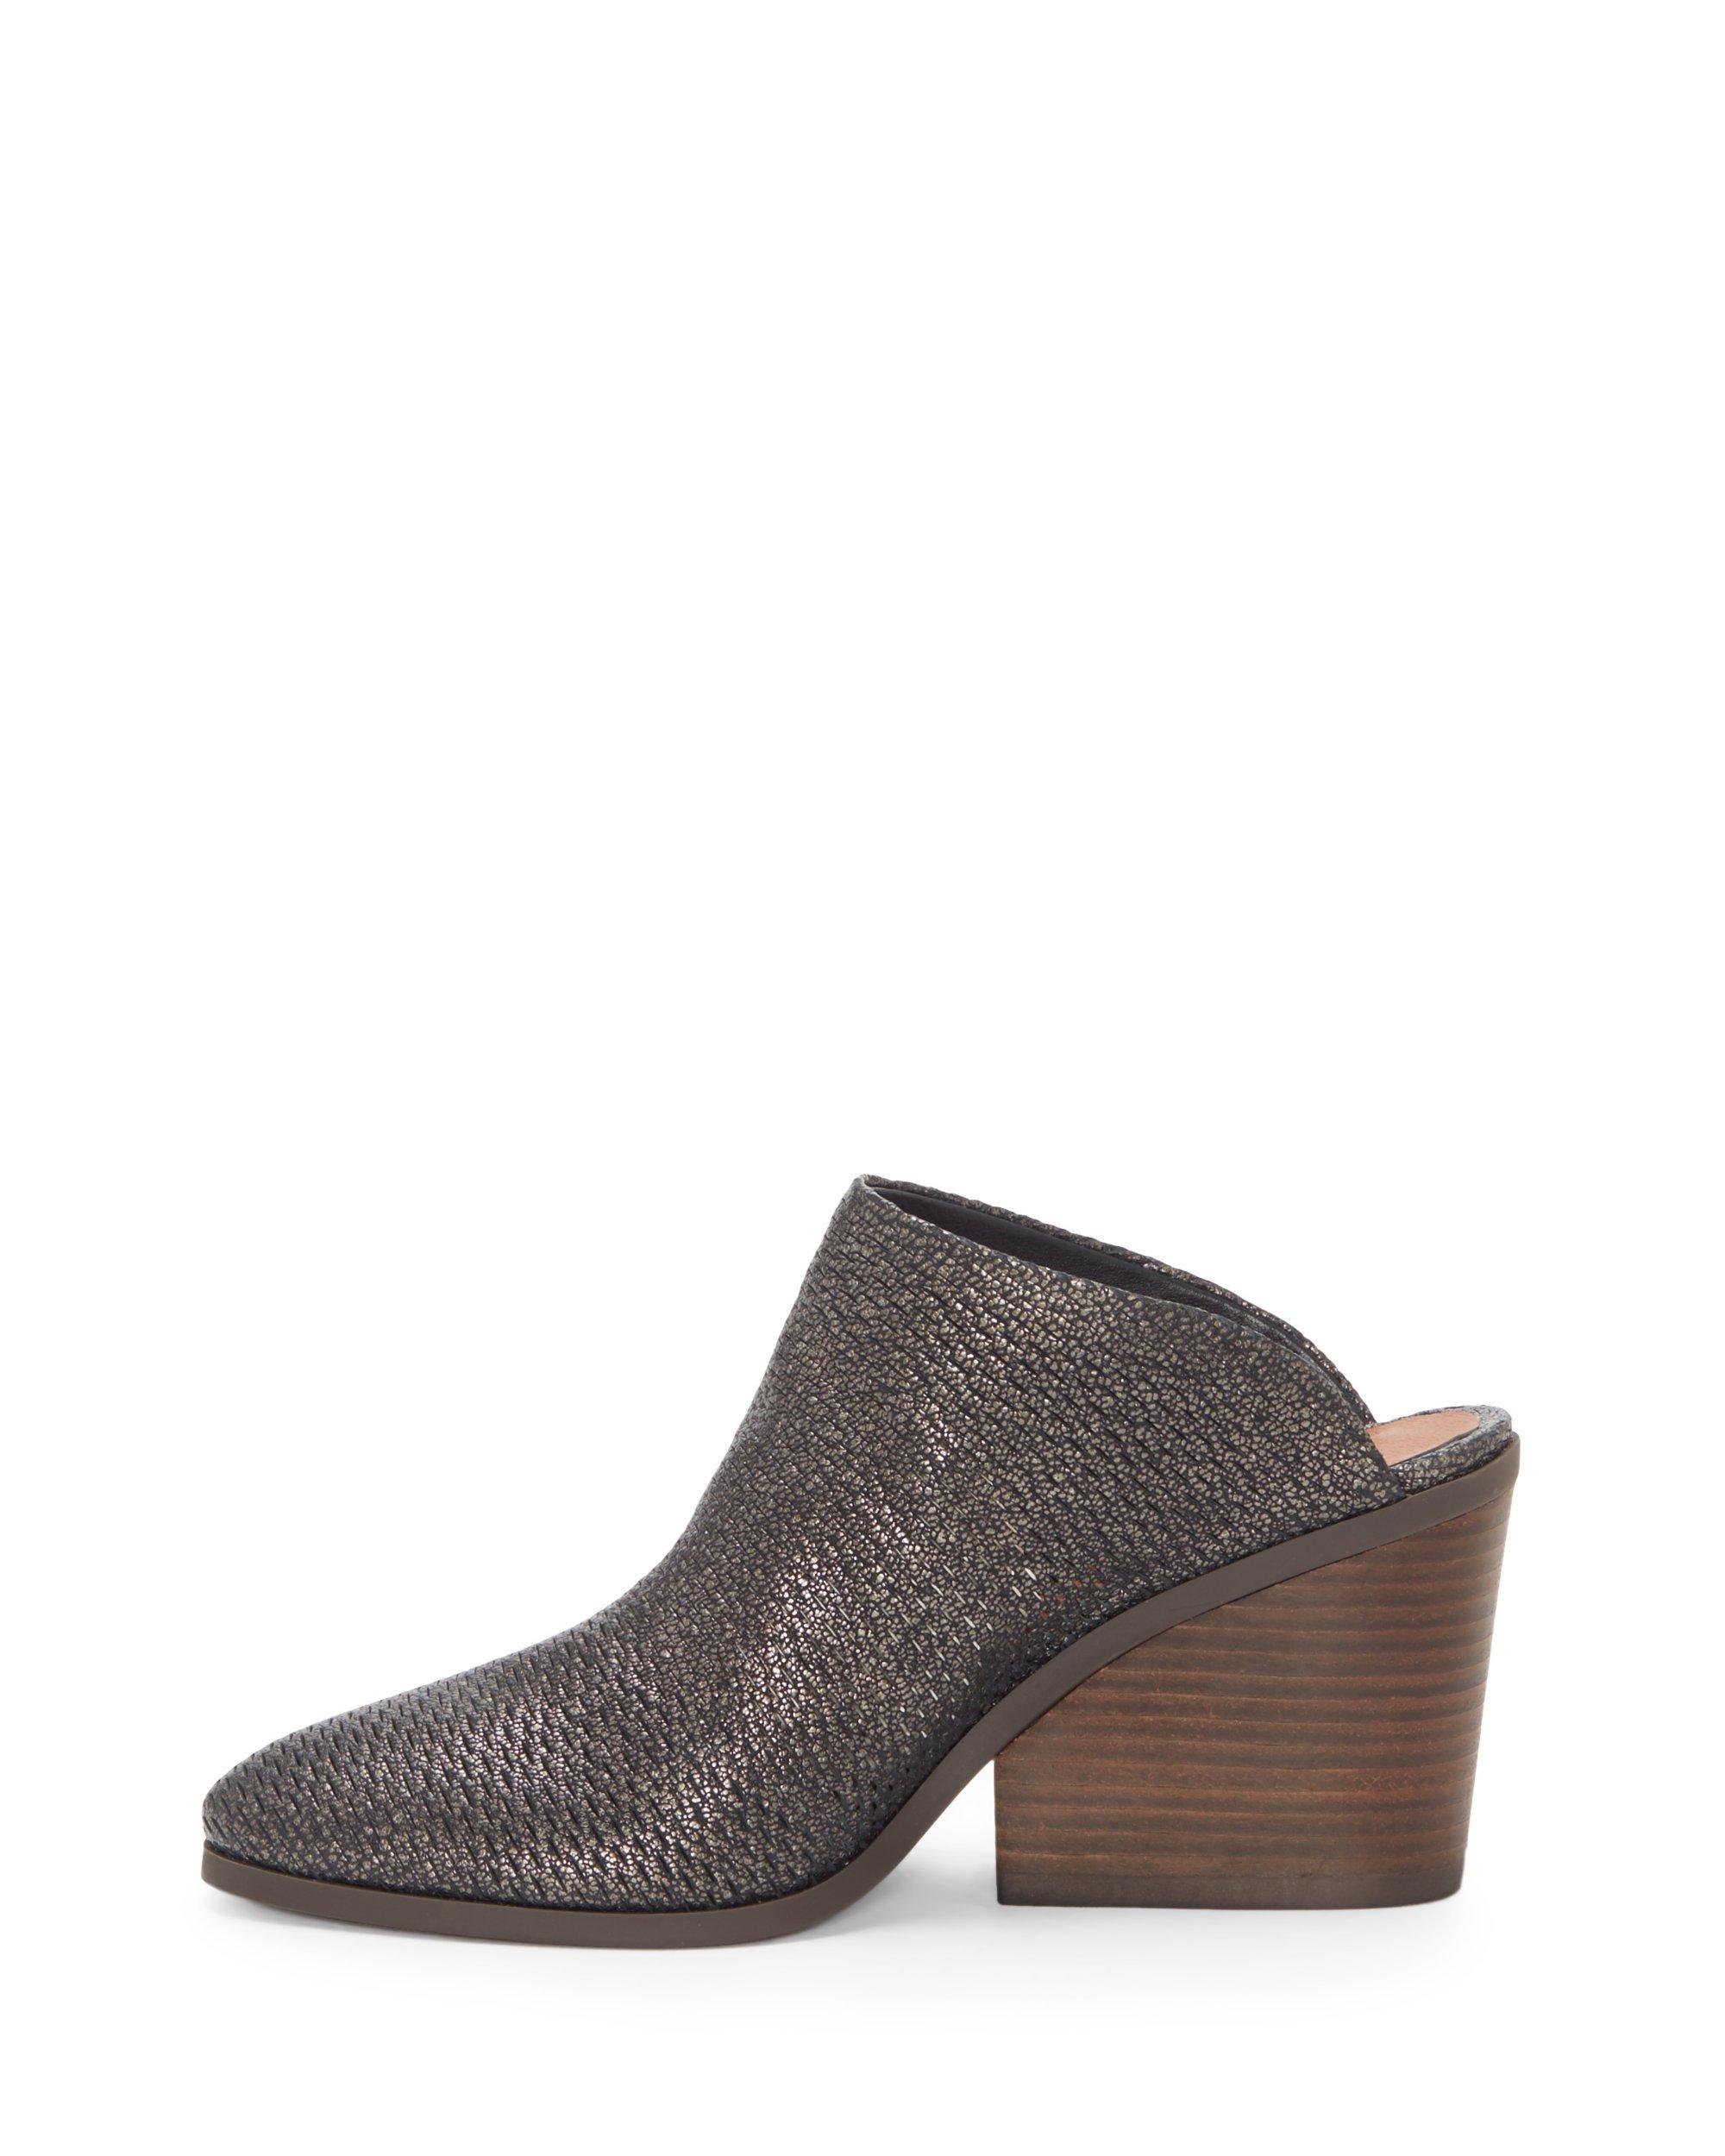 LARSSON WEDGE | Lucky Brand